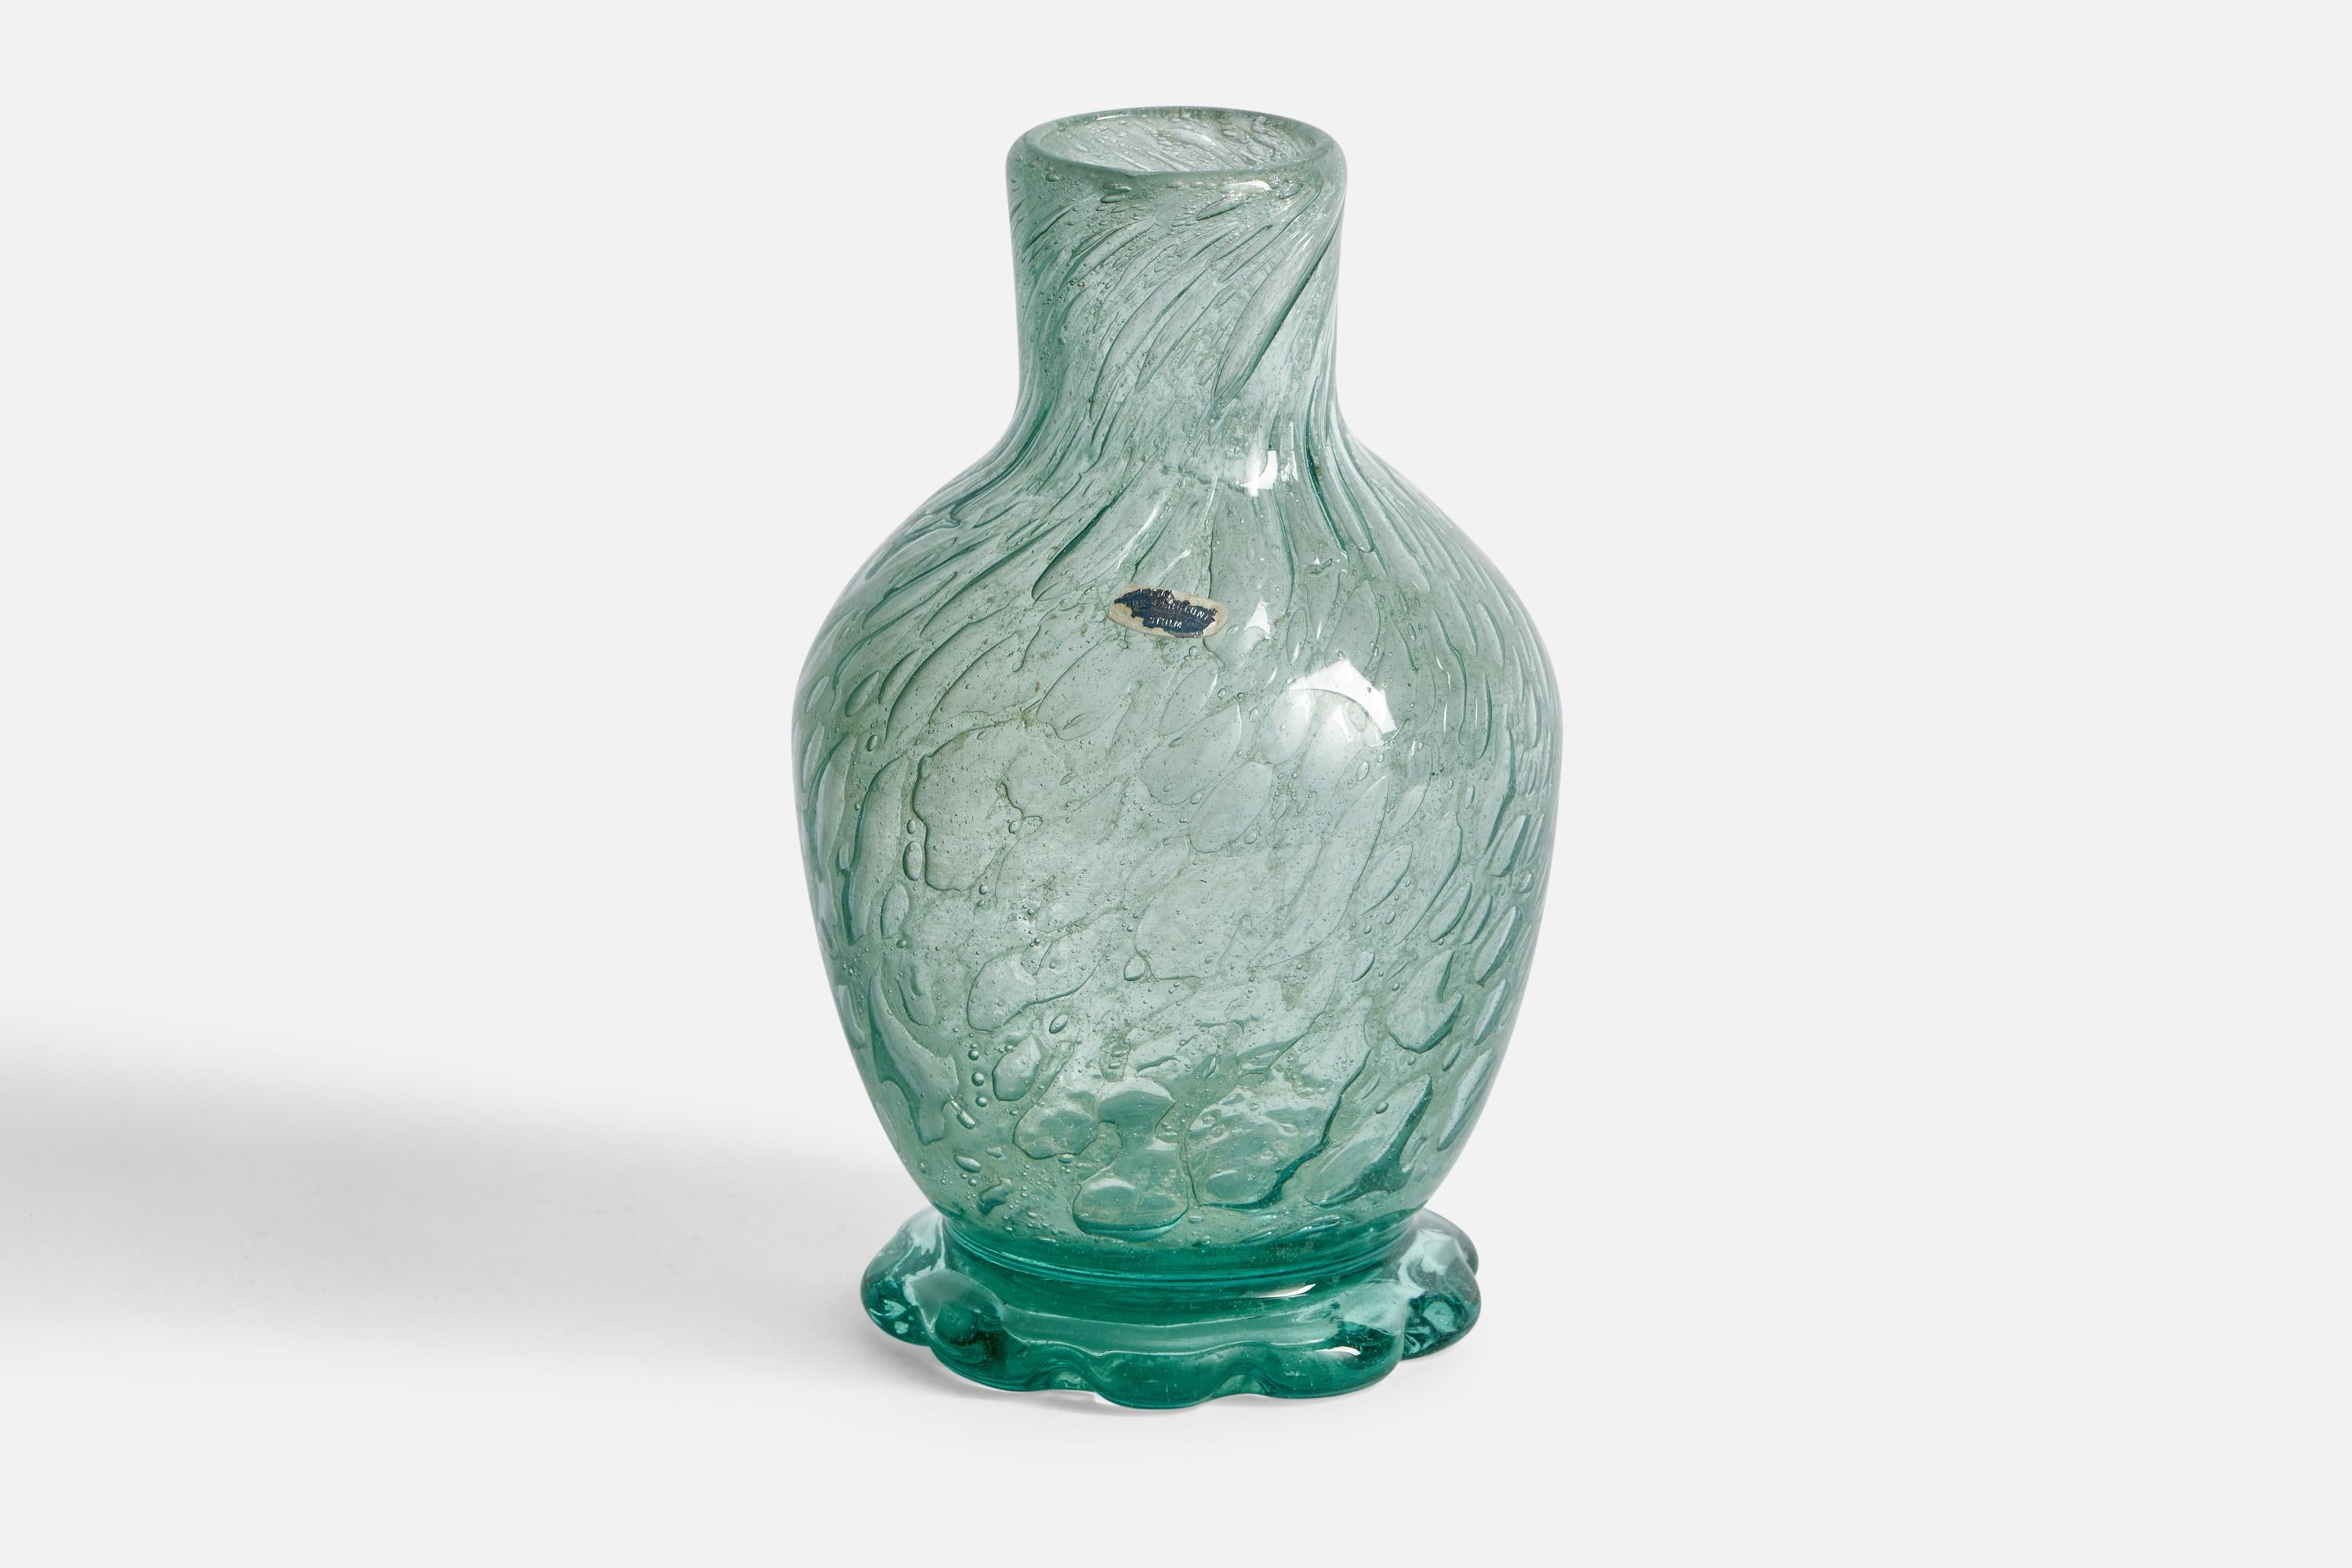 A blown glass vase designed by Ture Berglund and produced by Skansens Glasbruk, Sweden, 1940s.